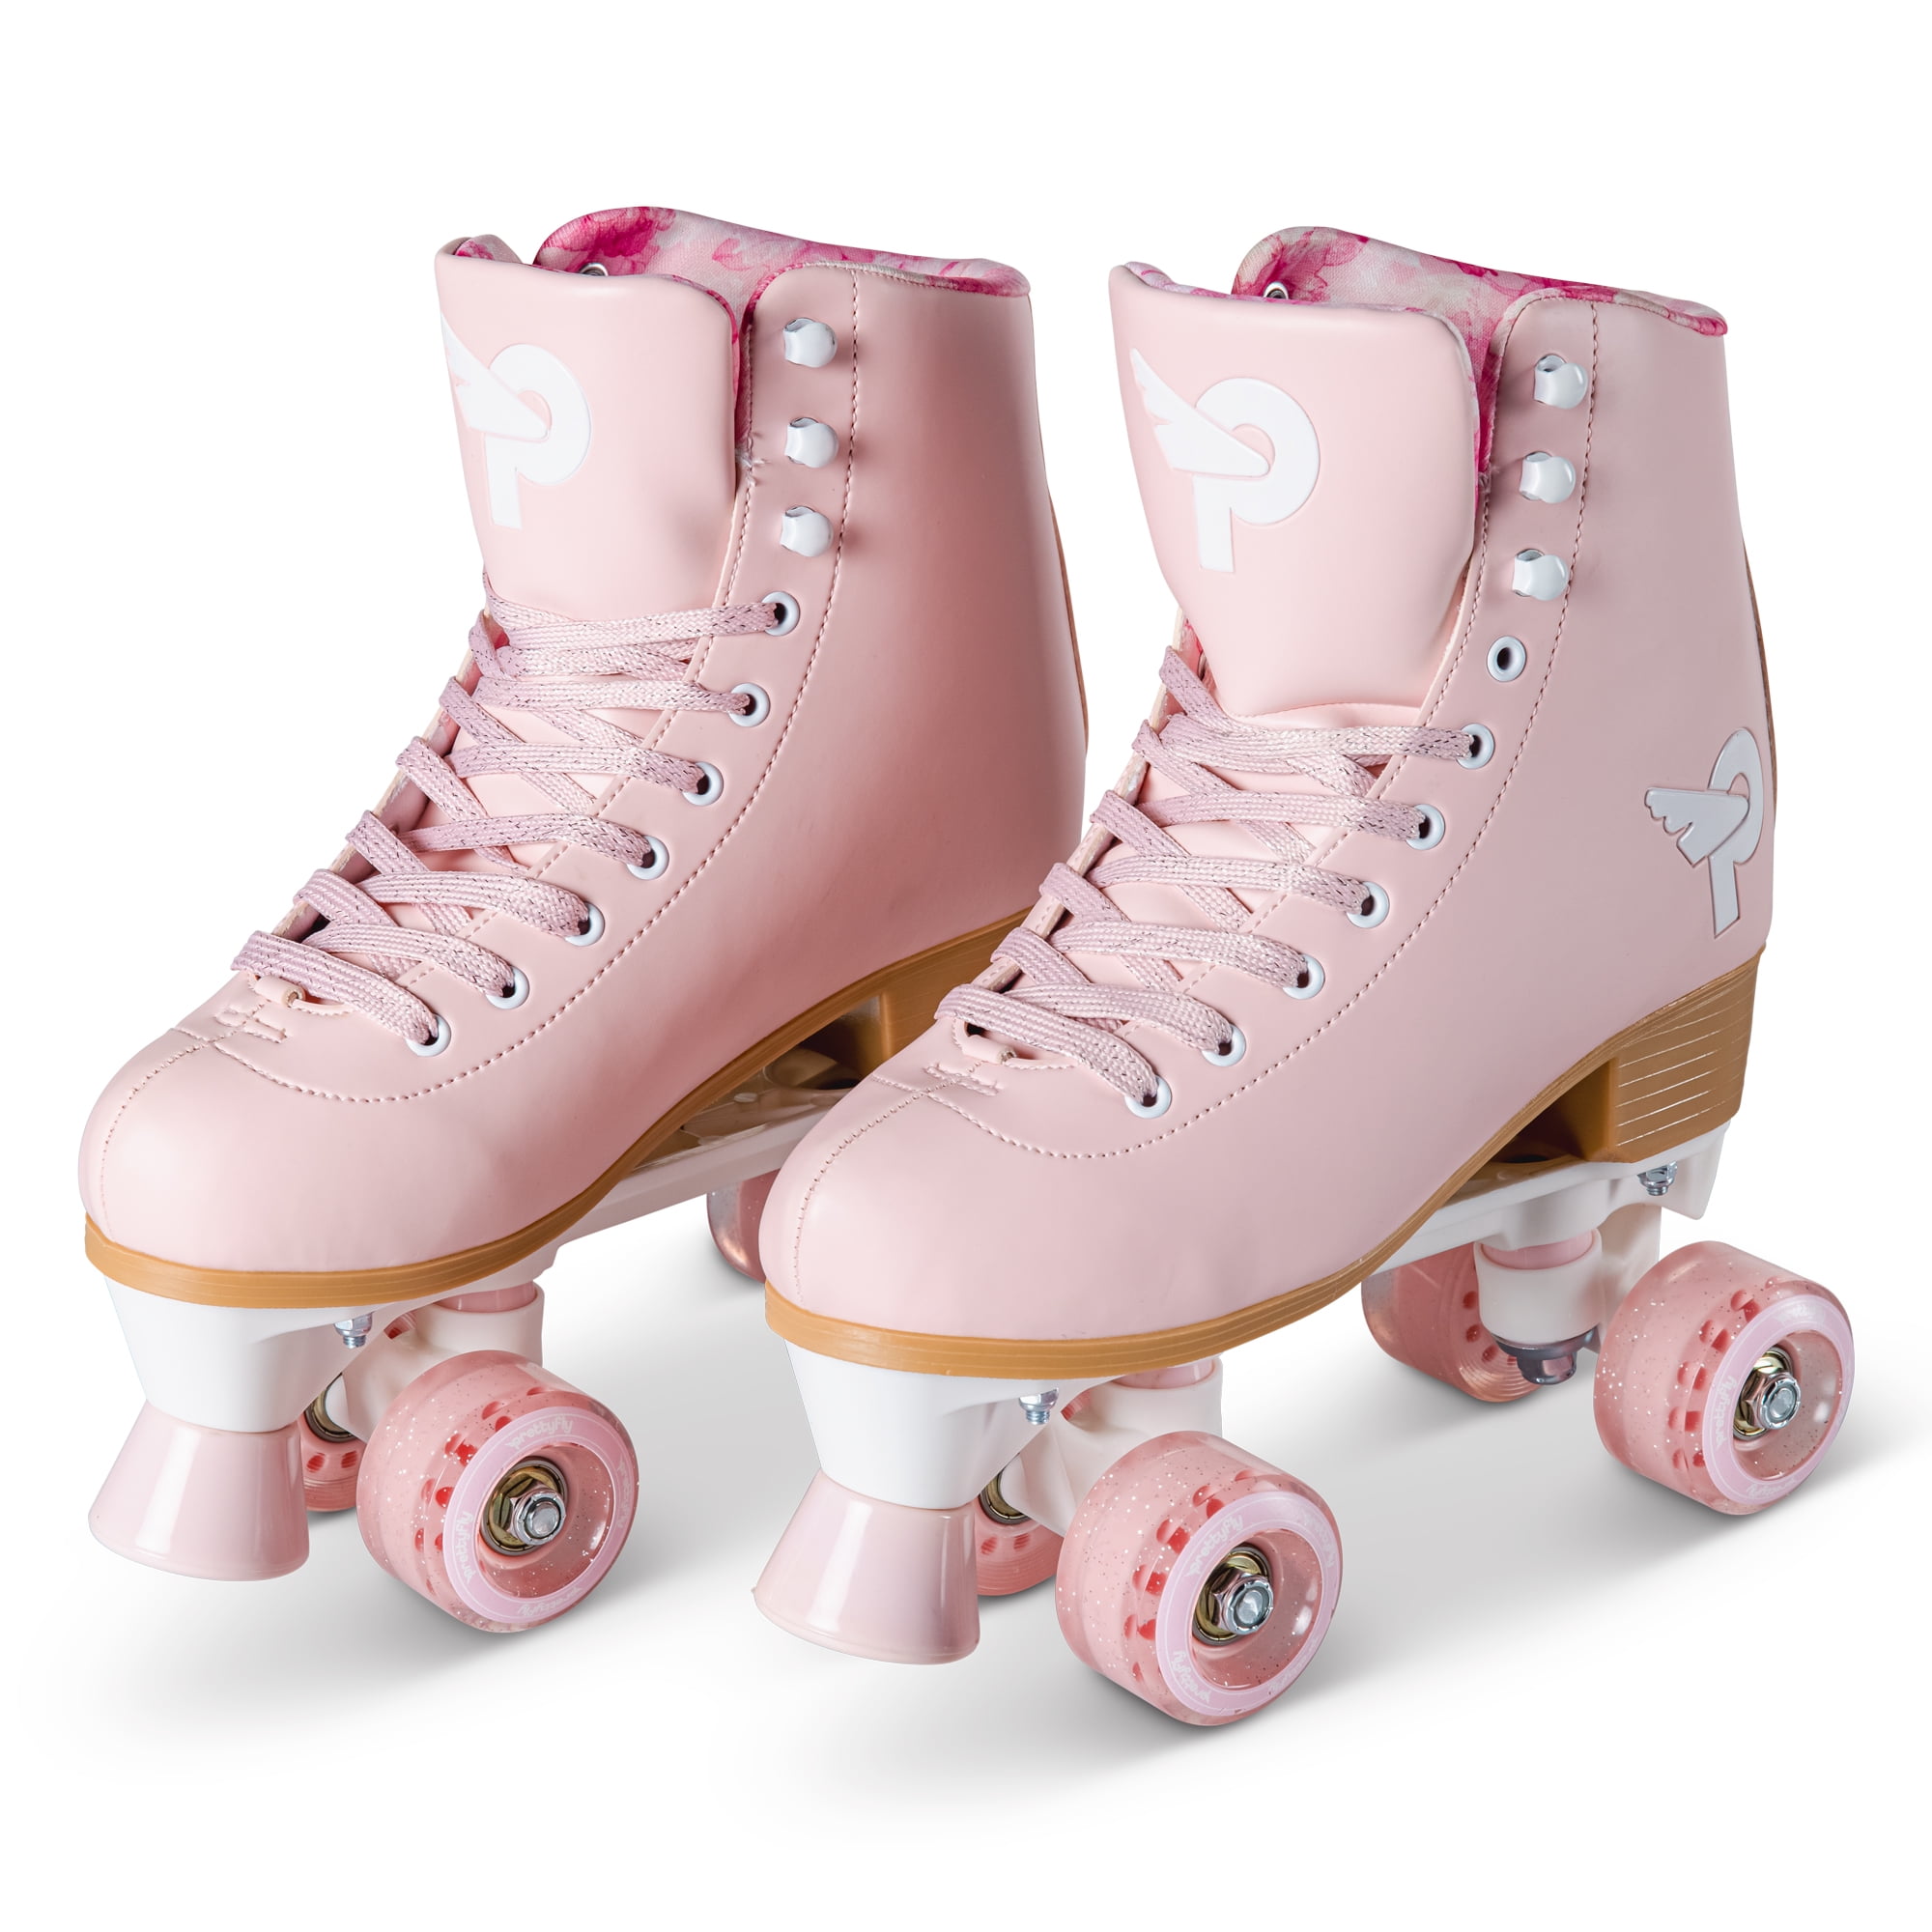 New Rookie Authentic v2 Blossom Pink Girls Womens Quad Wheels Roller Skates 